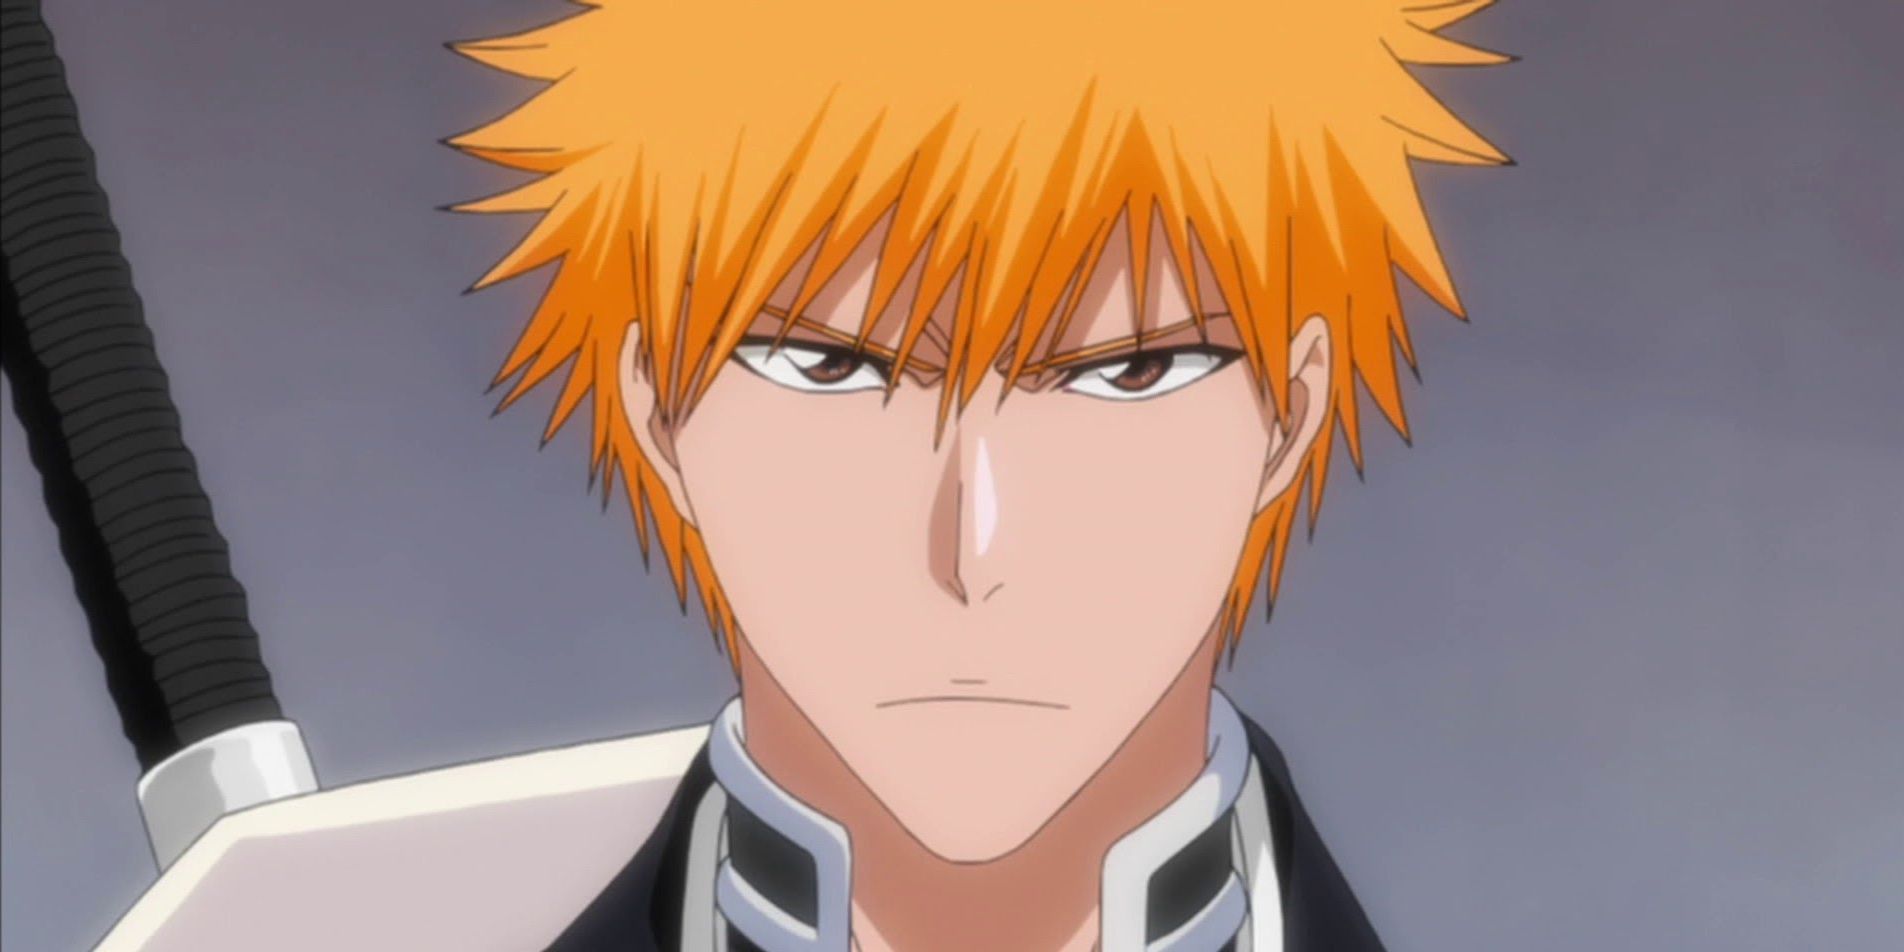 Cards from the Bleach Bankai Battle game  Bleach anime, Bleach anime  ichigo, Bleach characters